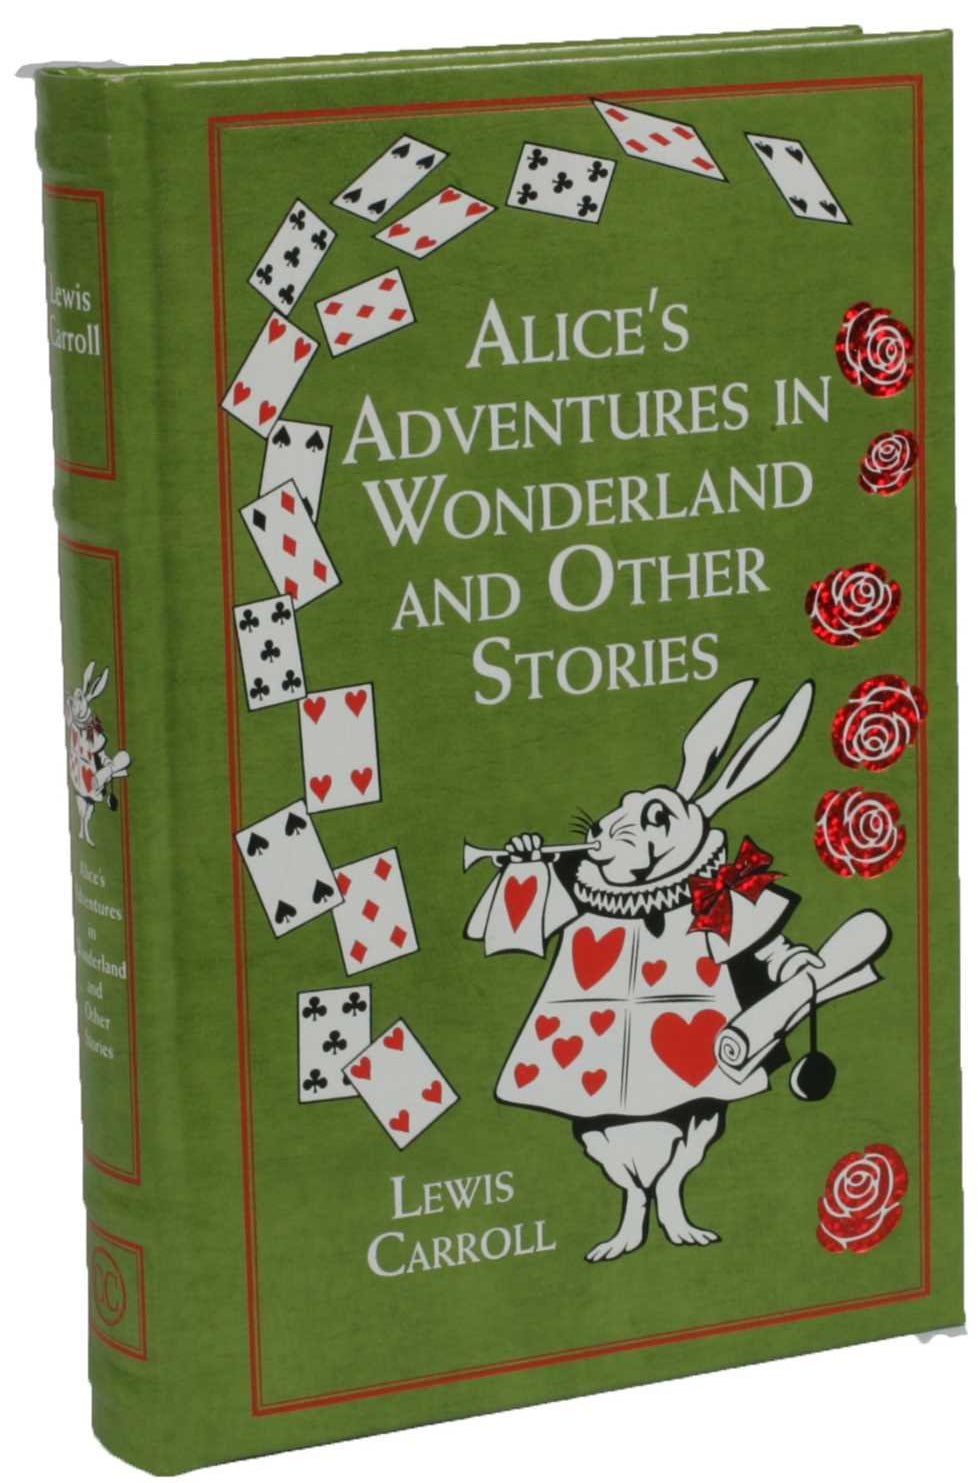 Alice's Adventures in Wonderland and Other Stories -- DragonSpace